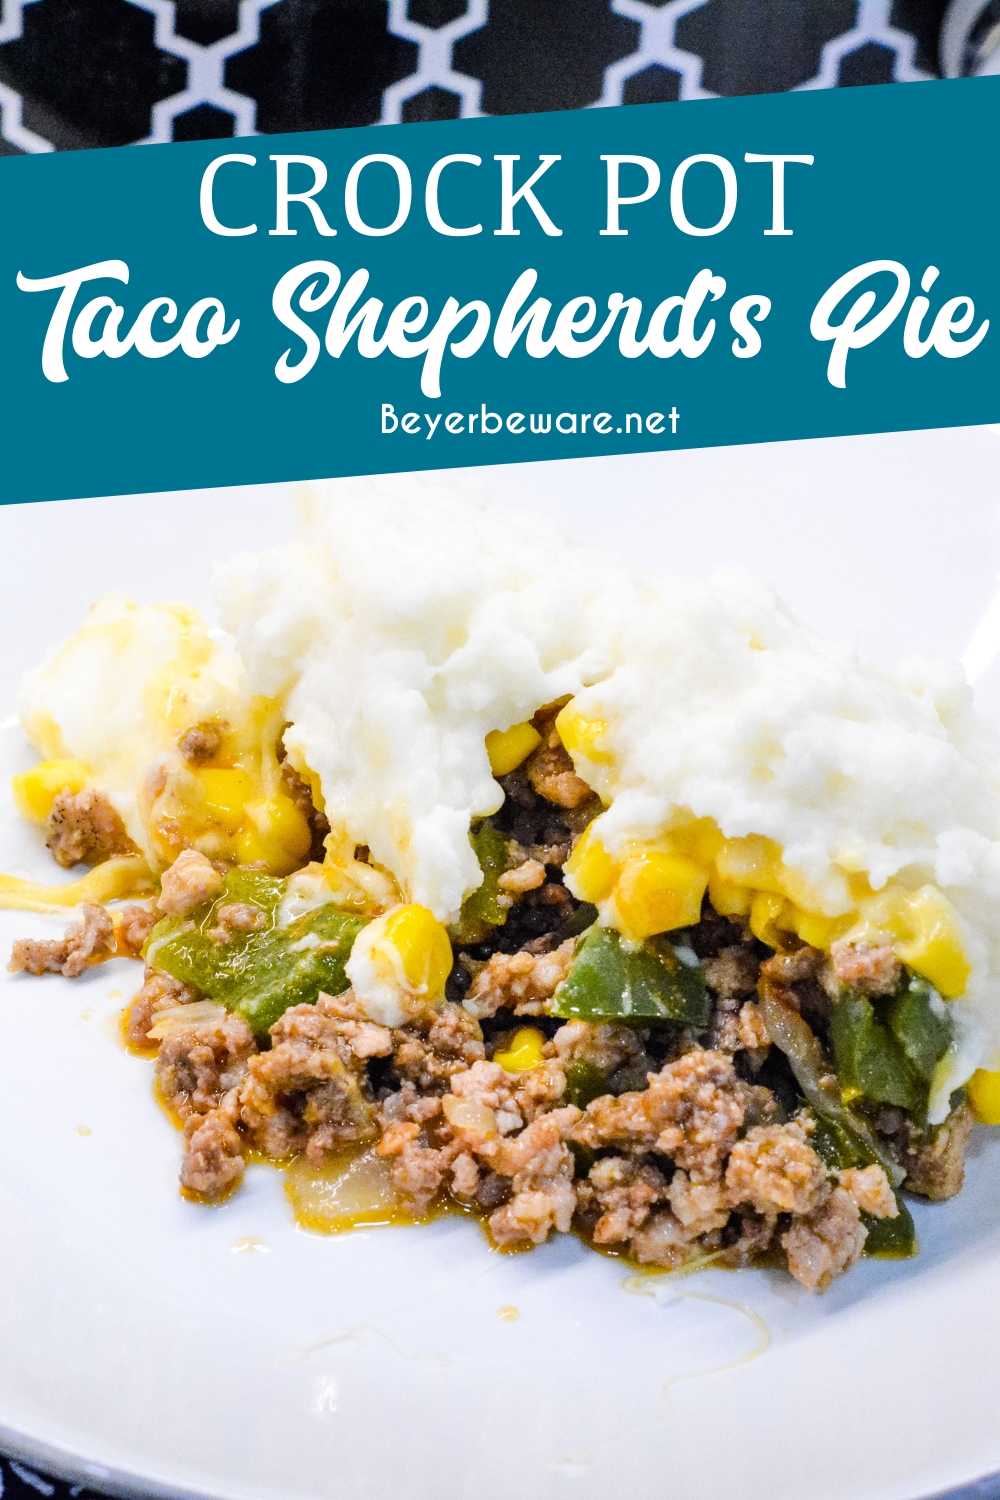 Taco Shepherd's Pie is an easy taco casserole made with leftover mashed potatoes, ground beef, corn, cheese, and peppers in the crock pot or oven.